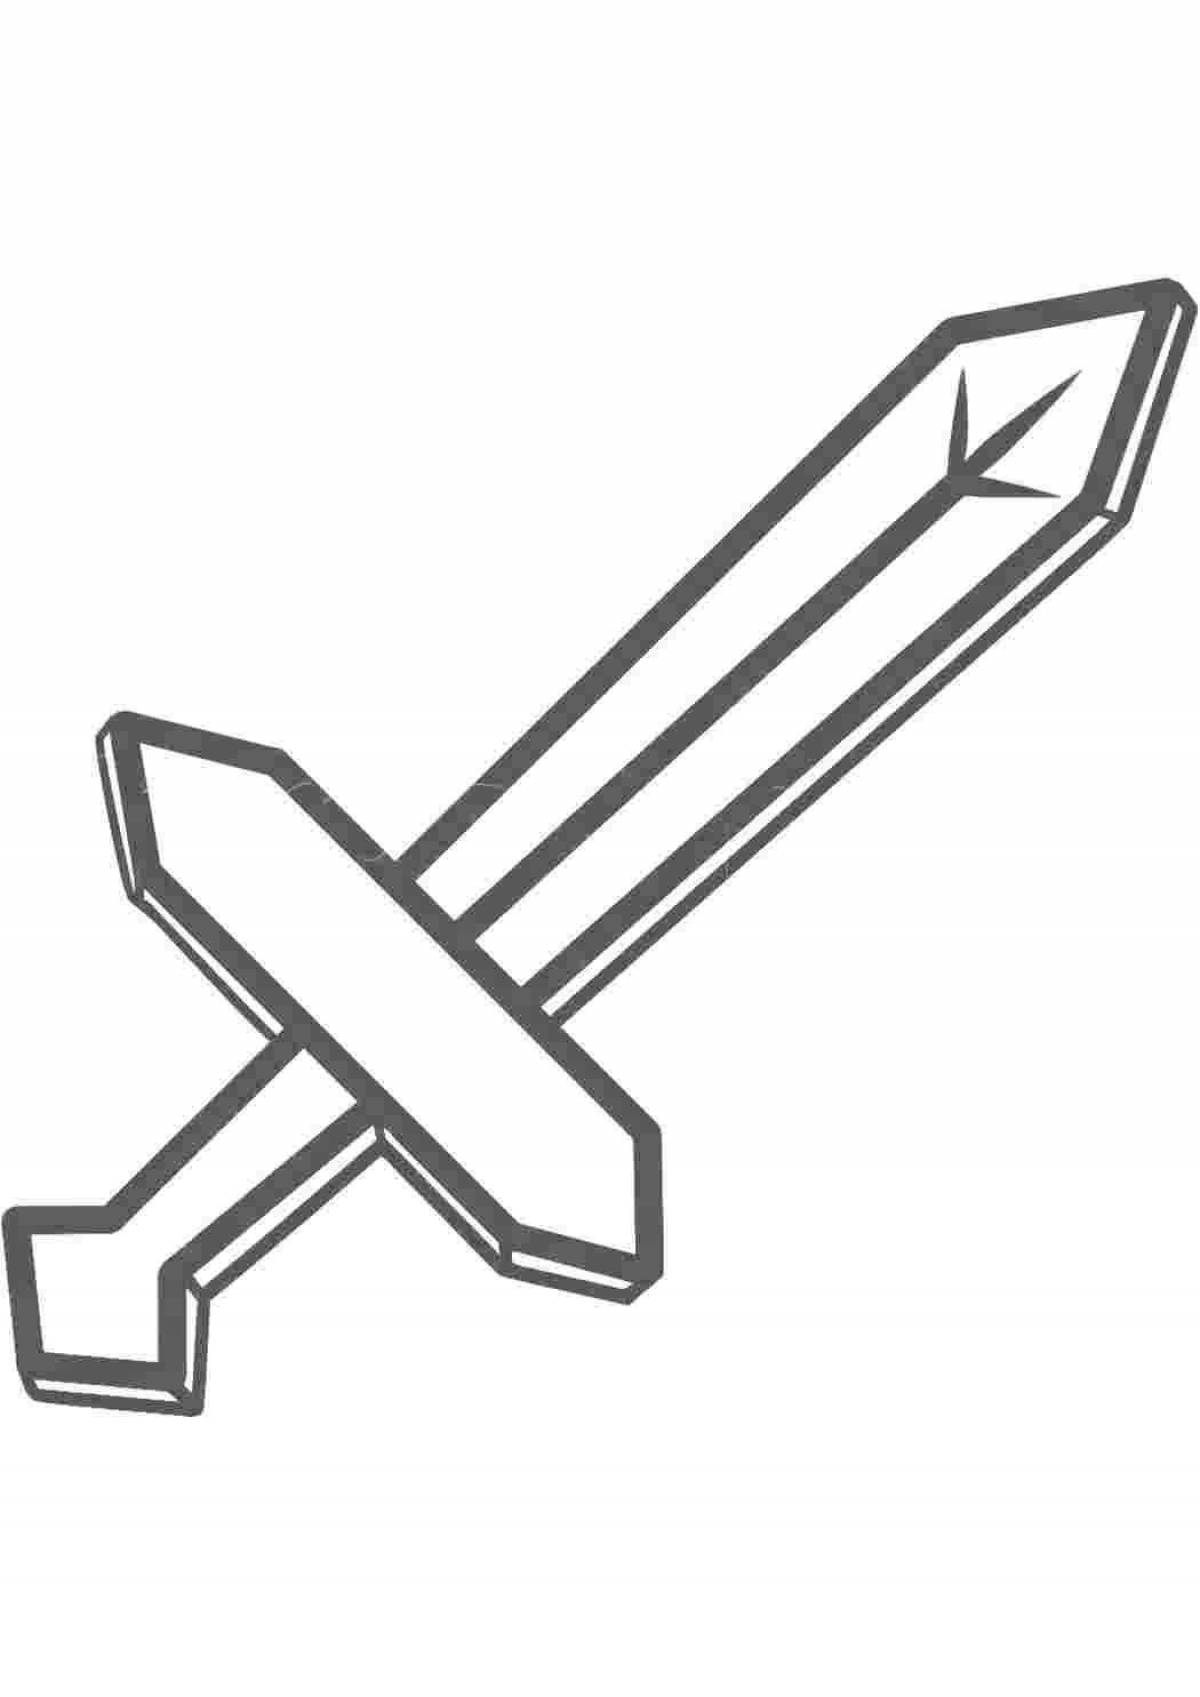 Bright minecraft coloring page with diamond sword